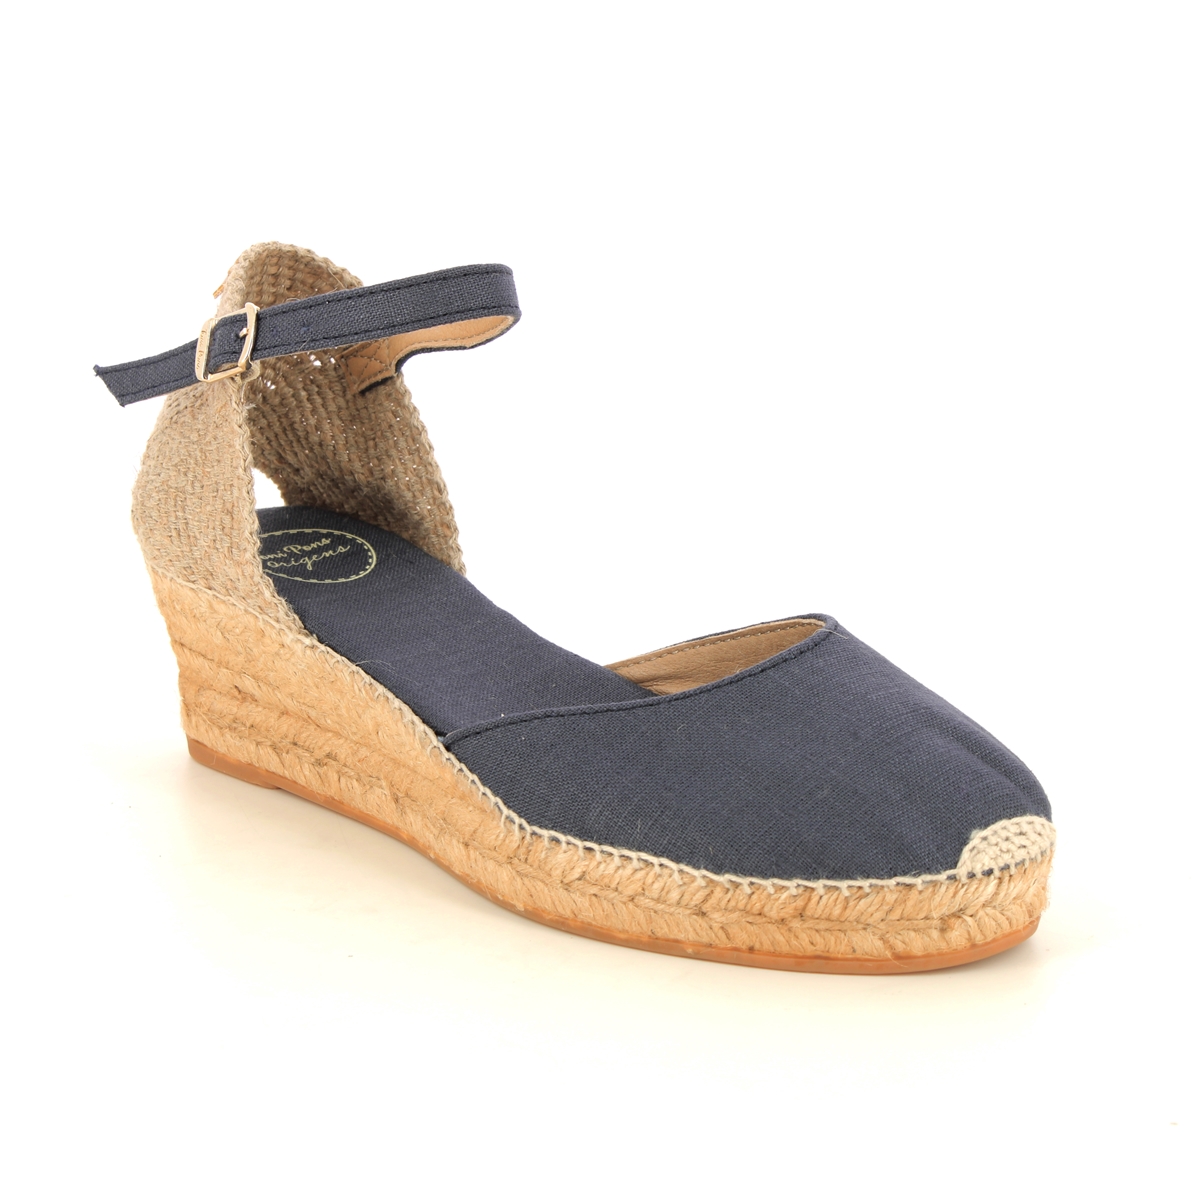 Toni Pons Romina 3 Caldes Navy Womens Espadrilles 4004-70 in a Plain Textile in Size 36